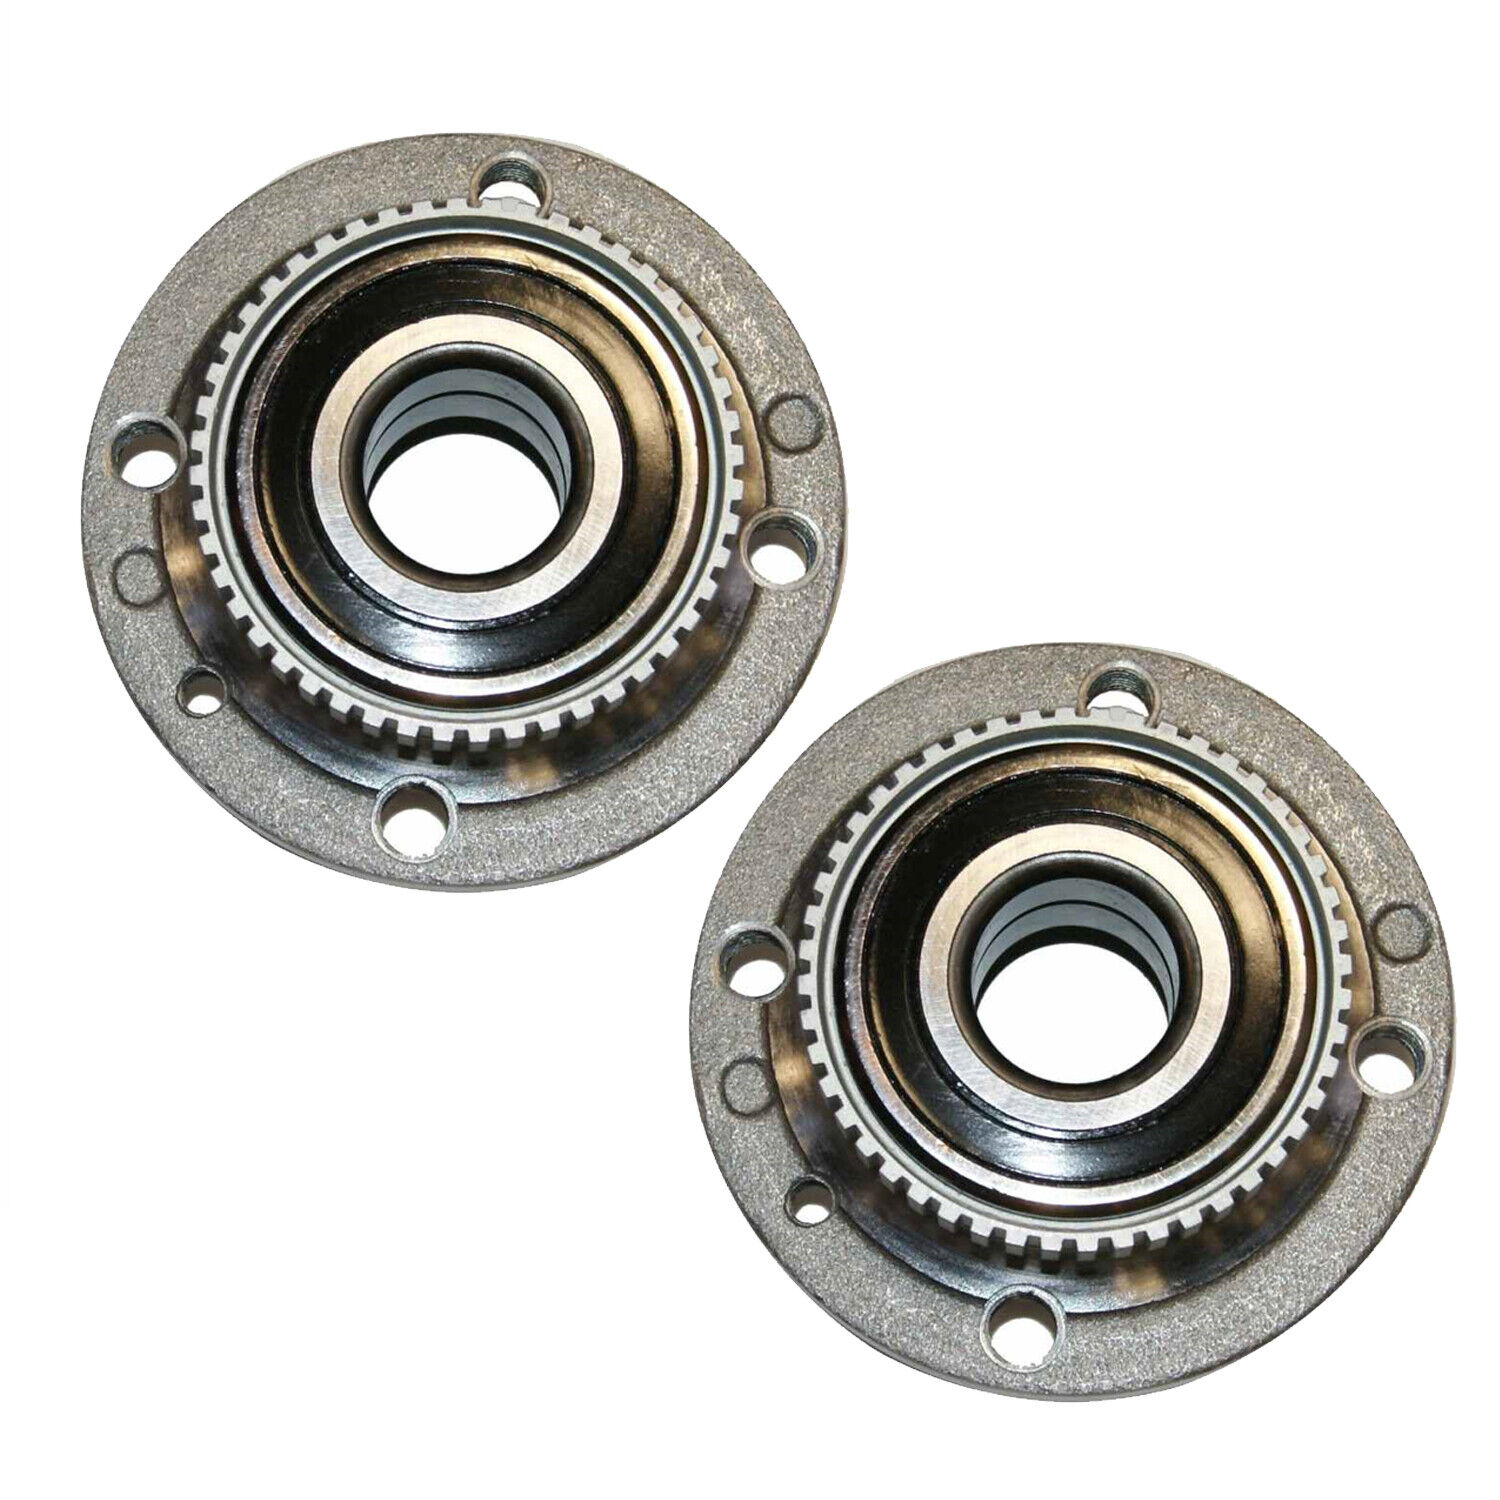 GMB Set of 2 Front Wheel Bearing and Hub Assemblies For BMW E30 318i 325i 325is